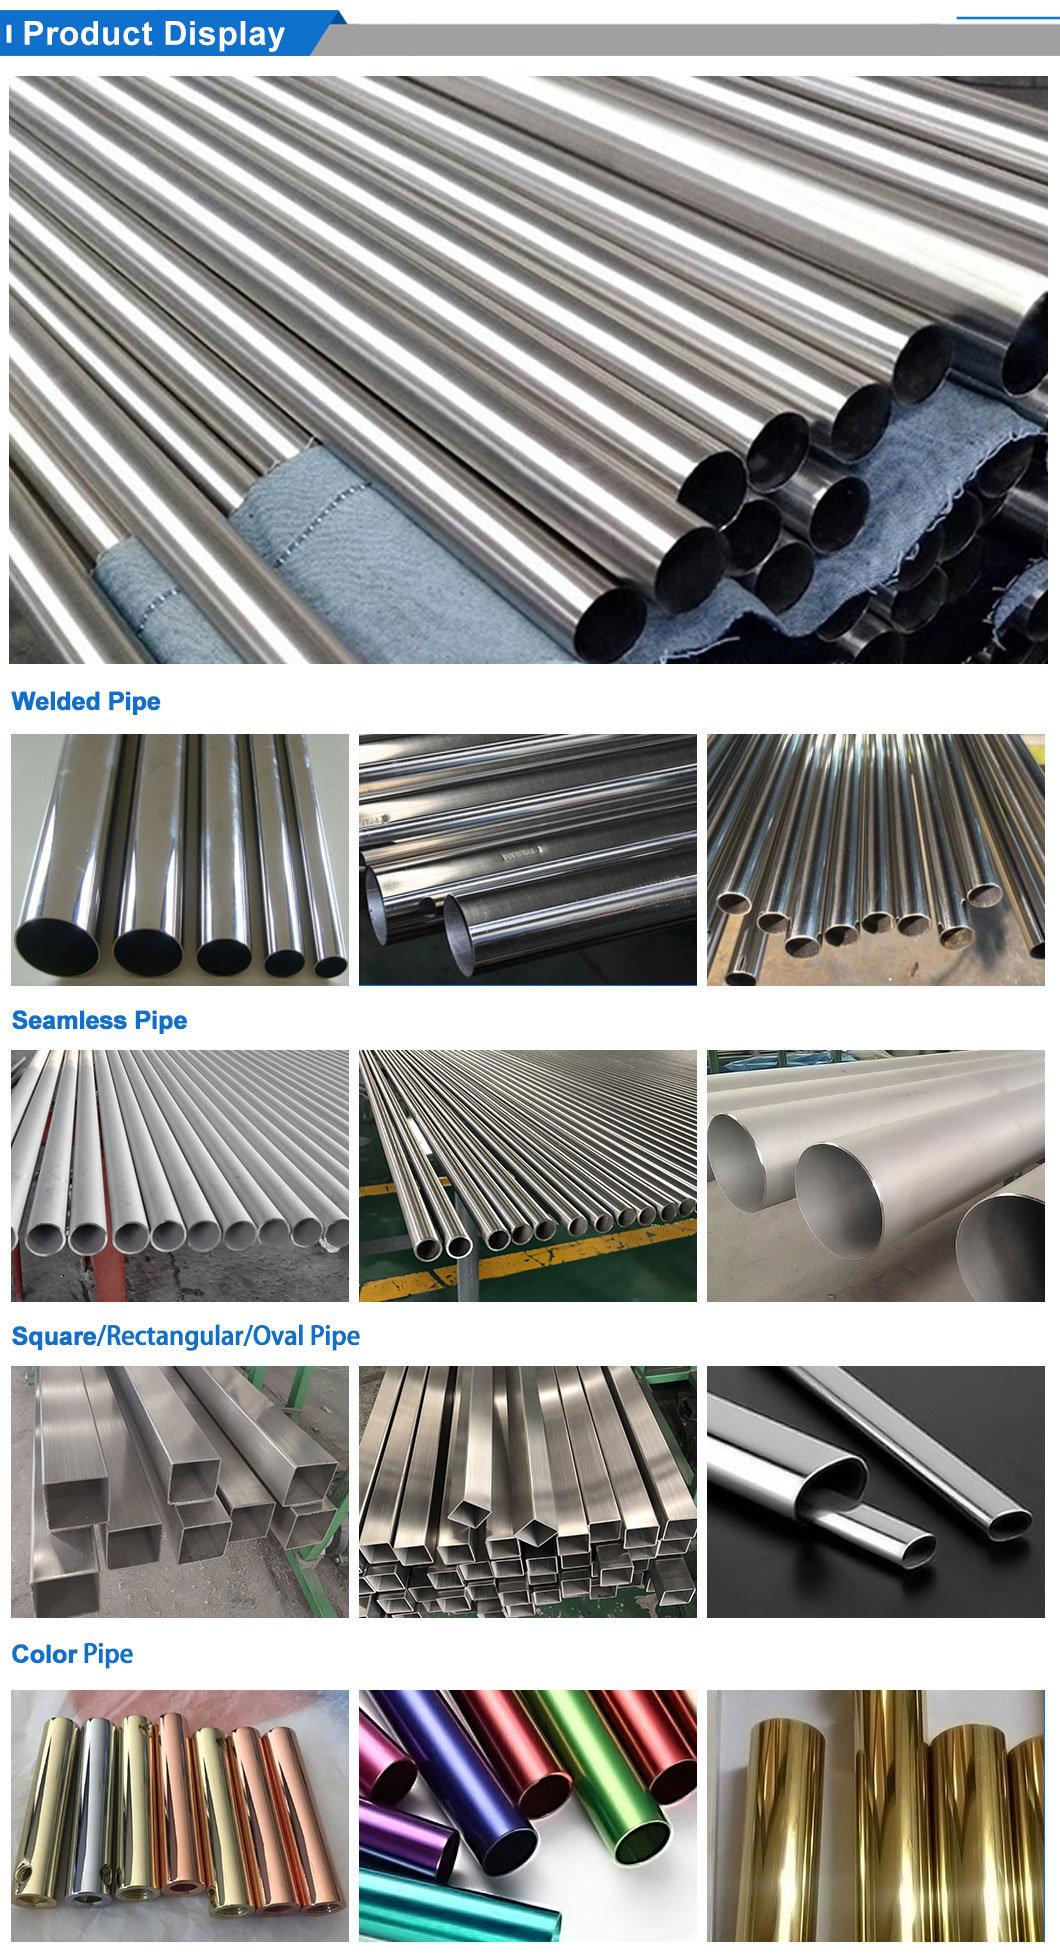 Stainless Steel Seamless Tube ASTM A312 Polished Surface Grade 316